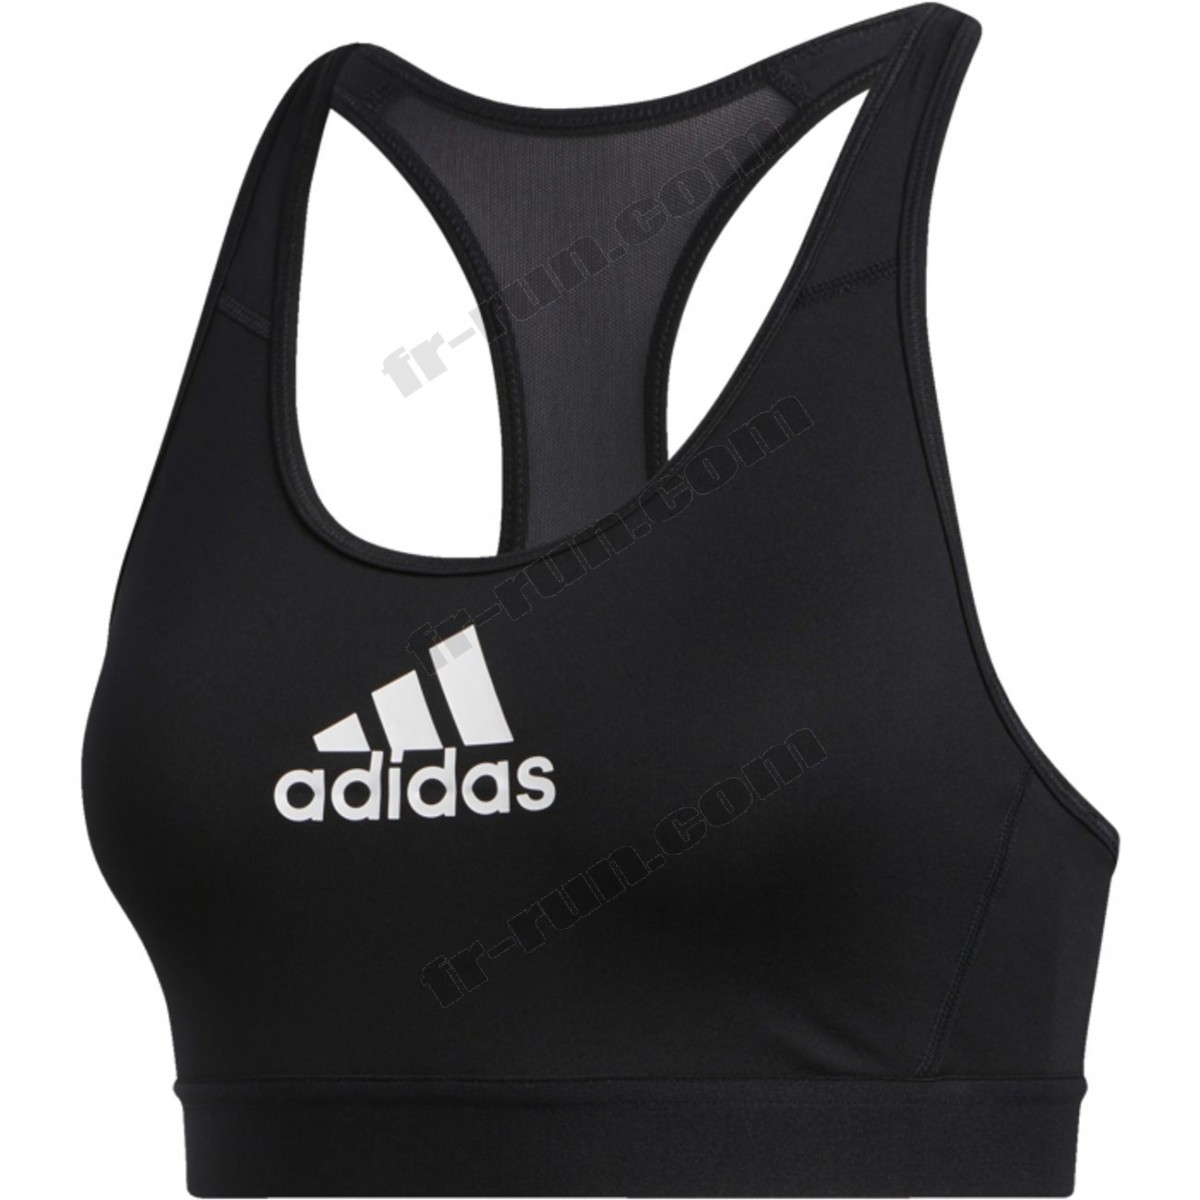 Adidas/BRASSIERE Fitness femme ADIDAS DRST ASK √ Nouveau style √ Soldes - Adidas/BRASSIERE Fitness femme ADIDAS DRST ASK √ Nouveau style √ Soldes